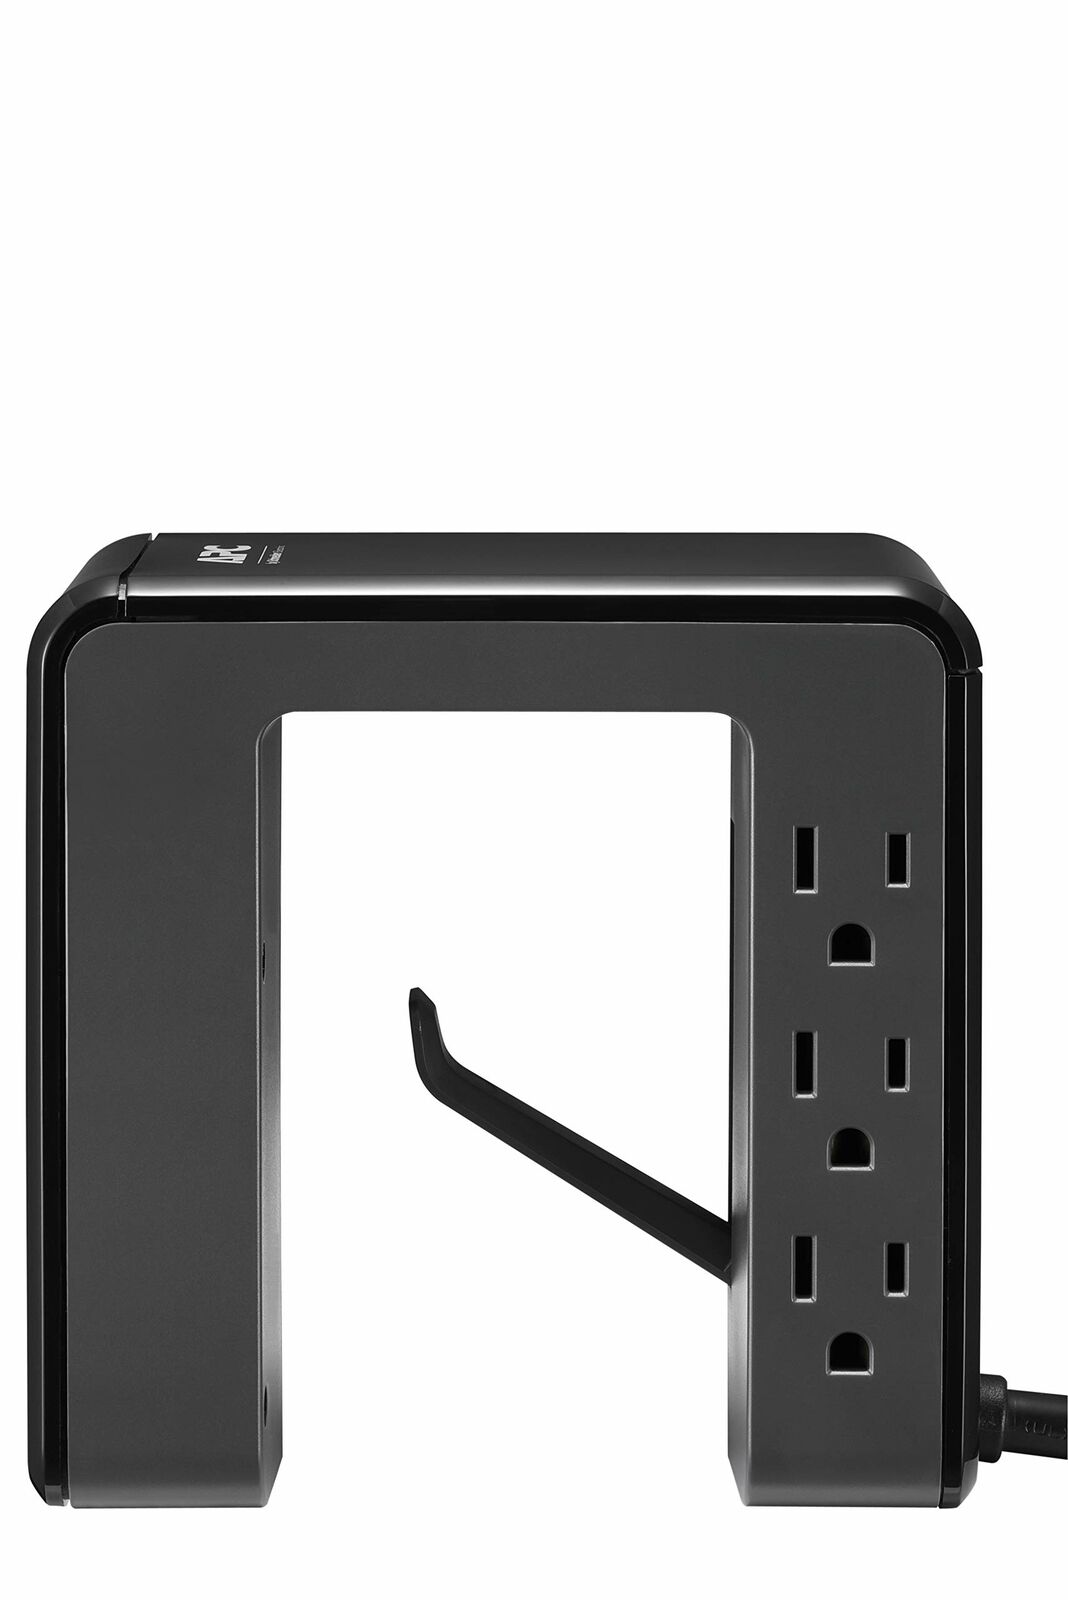 APC PE6U4 Essential SurgeArrest Desk-Mount Power Station with 6 Outlets and 4 USB Charging Ports (Black) - image 5 of 7